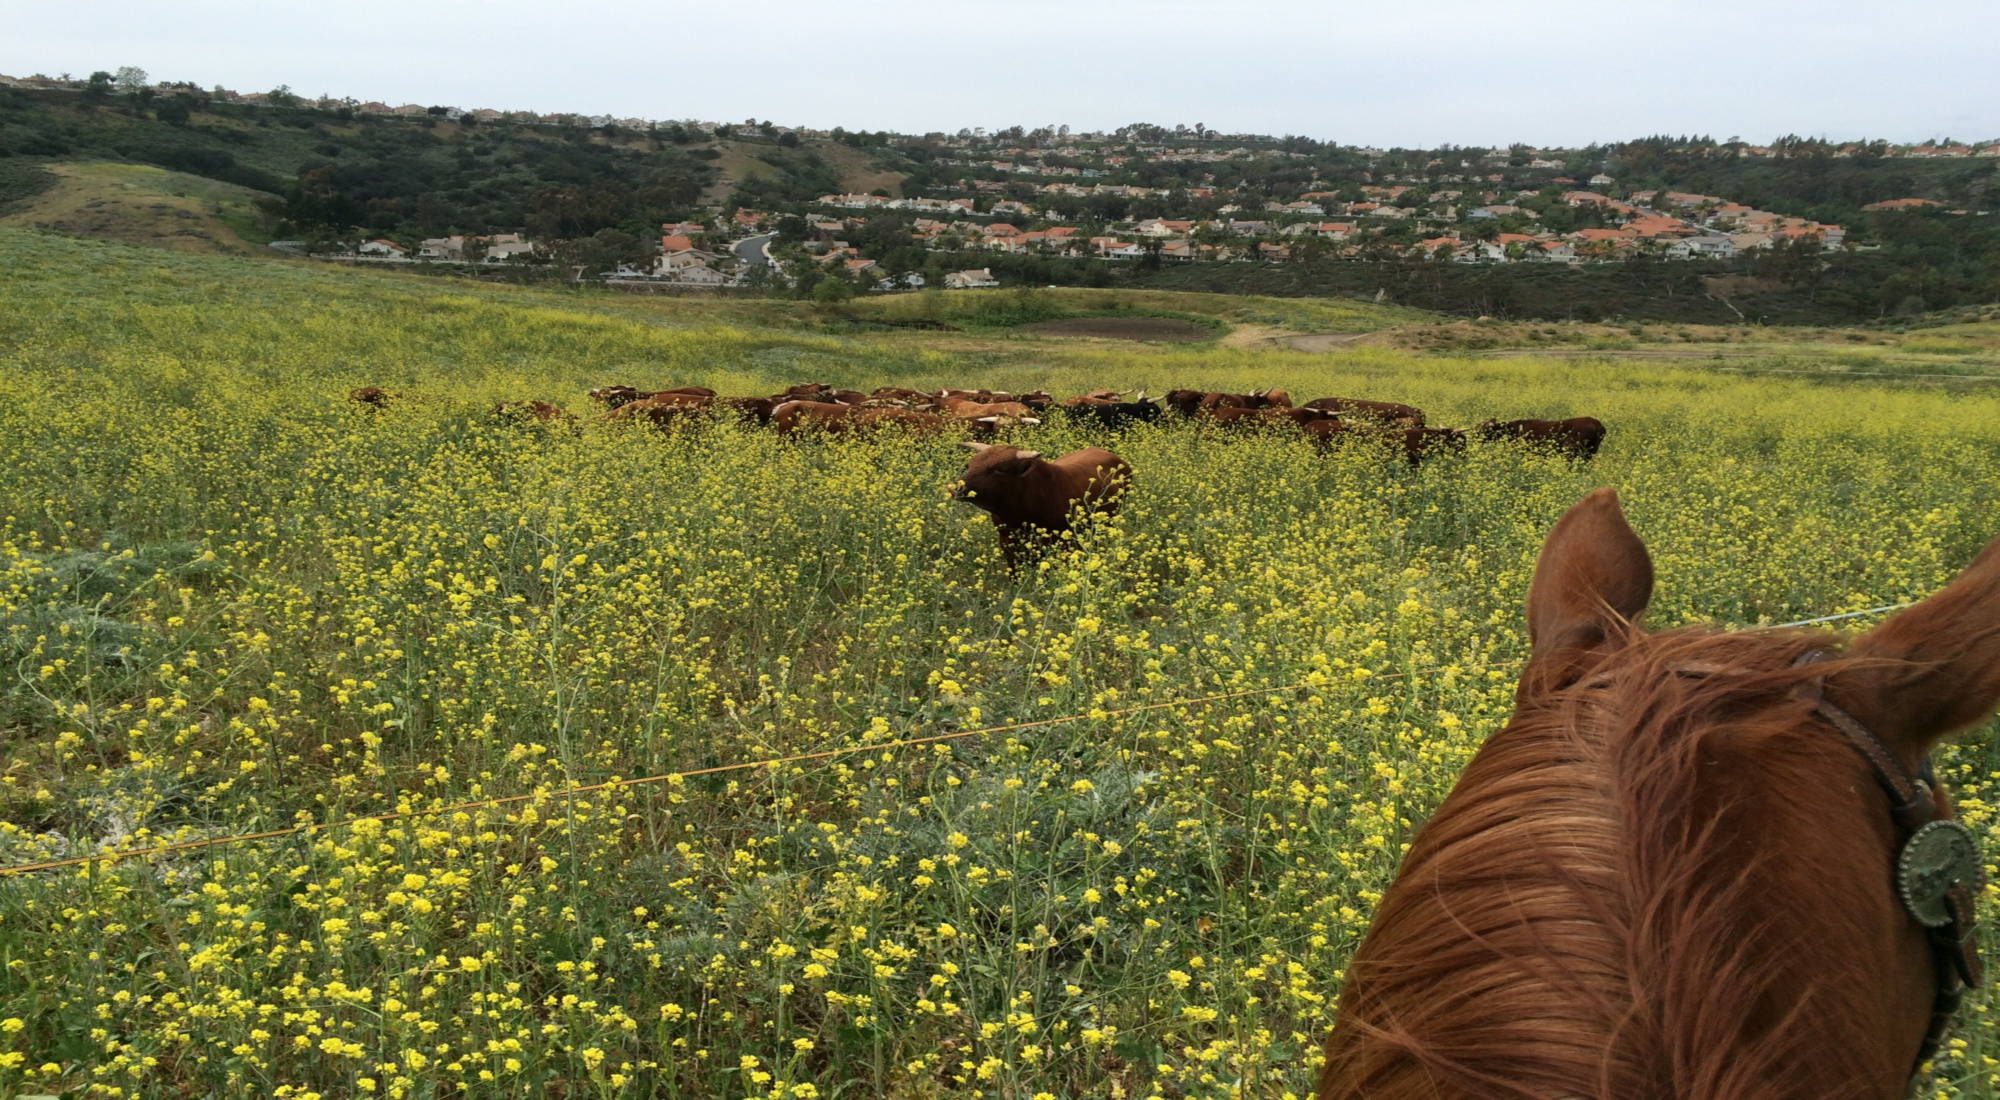 Hered of brown Barzona cattle partially hidden by tall yellow flowers and green grass with suburban  houses in the background